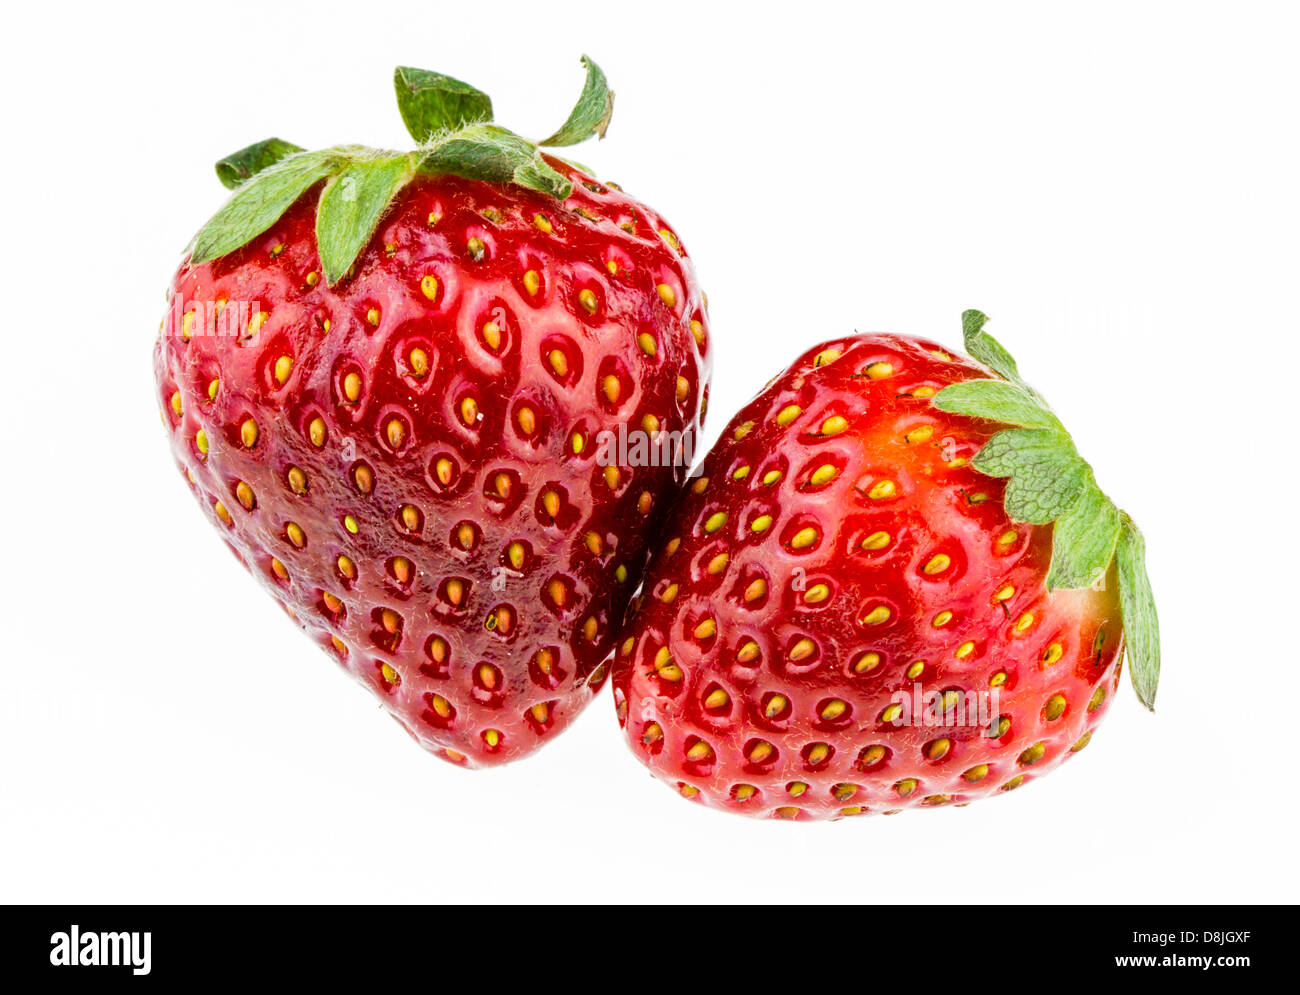 Two ripe strawberries isolated against a white background. Stock Photo